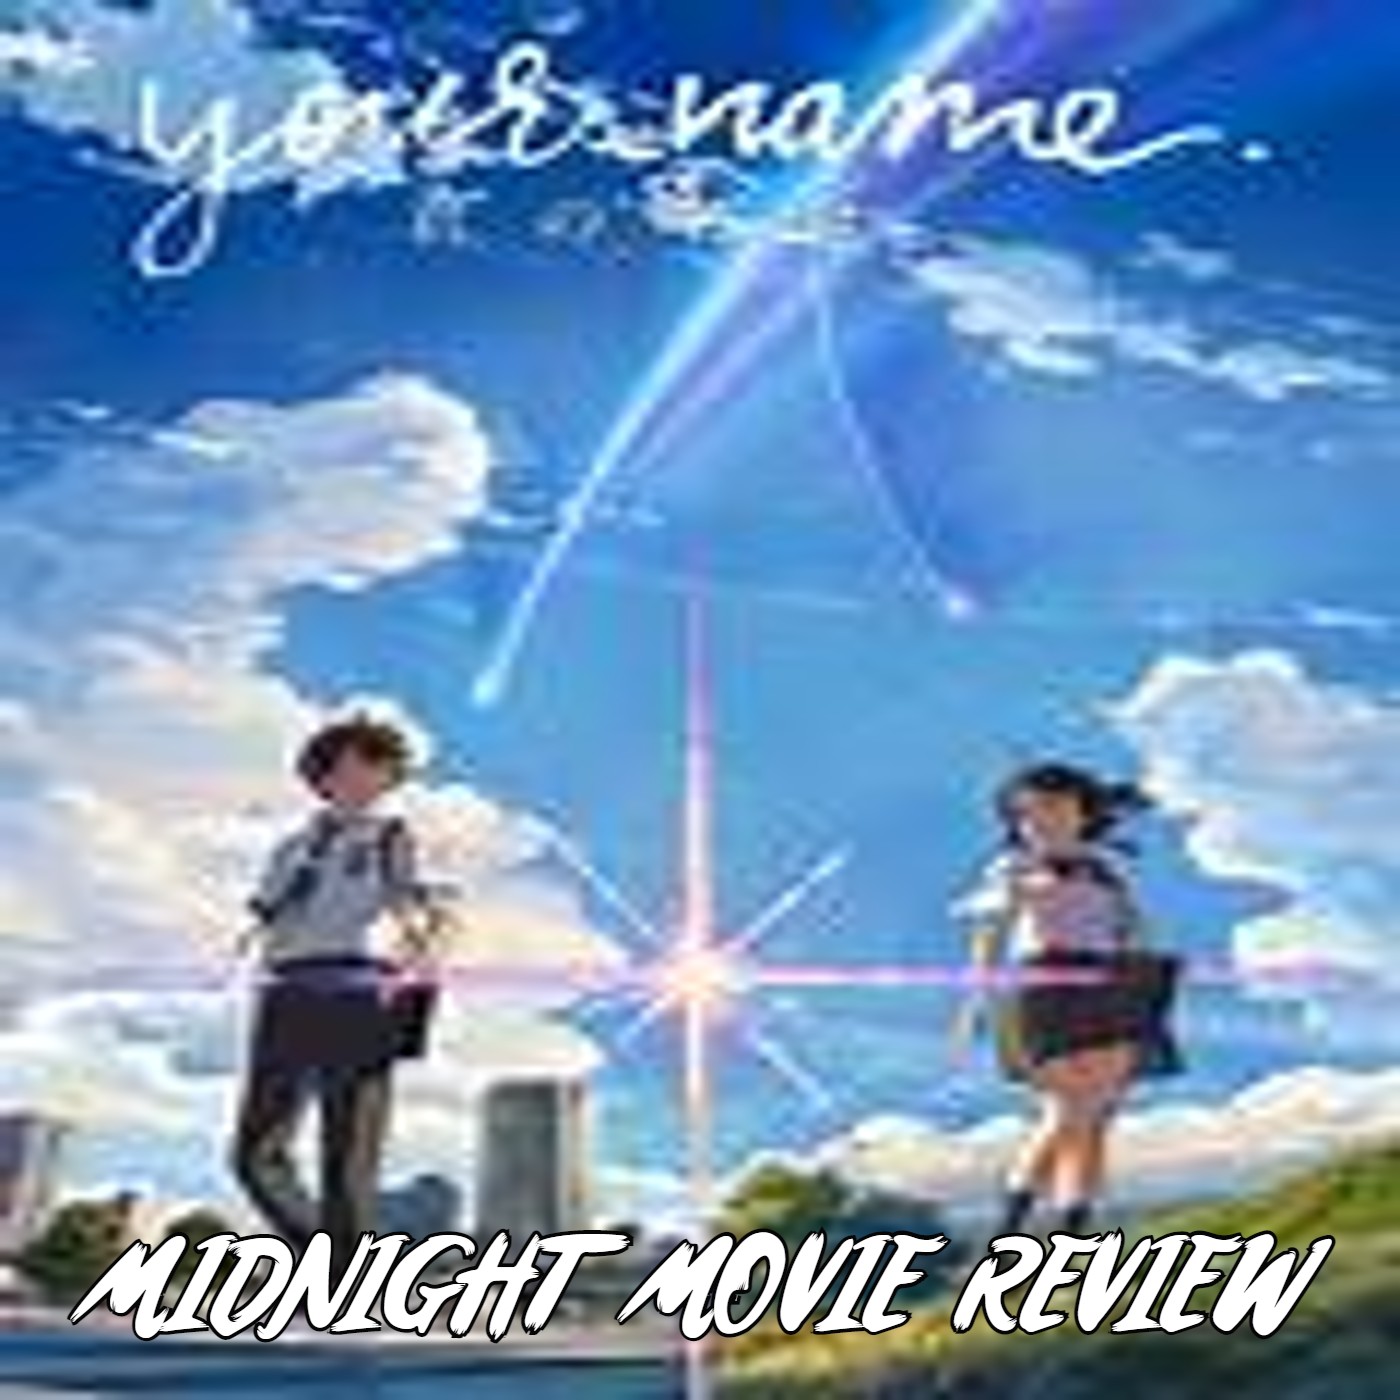 Your Name - Review